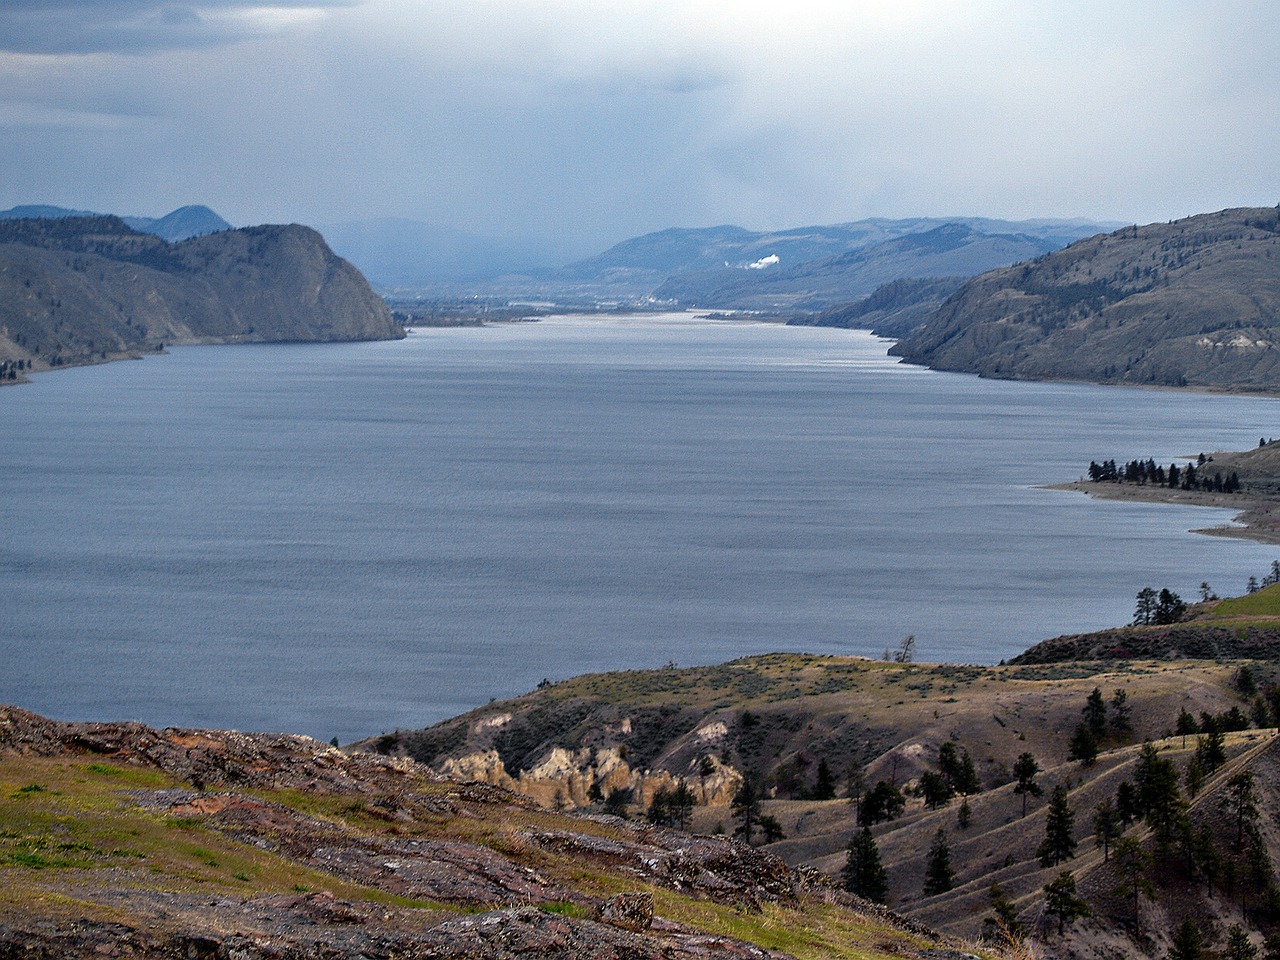 kamloops lake,british columbia,water,lake,canada,weather,thunderstorm,scenery,landscape,canada scenery,free pictures, free photos, free images, royalty free, free illustrations, public domain